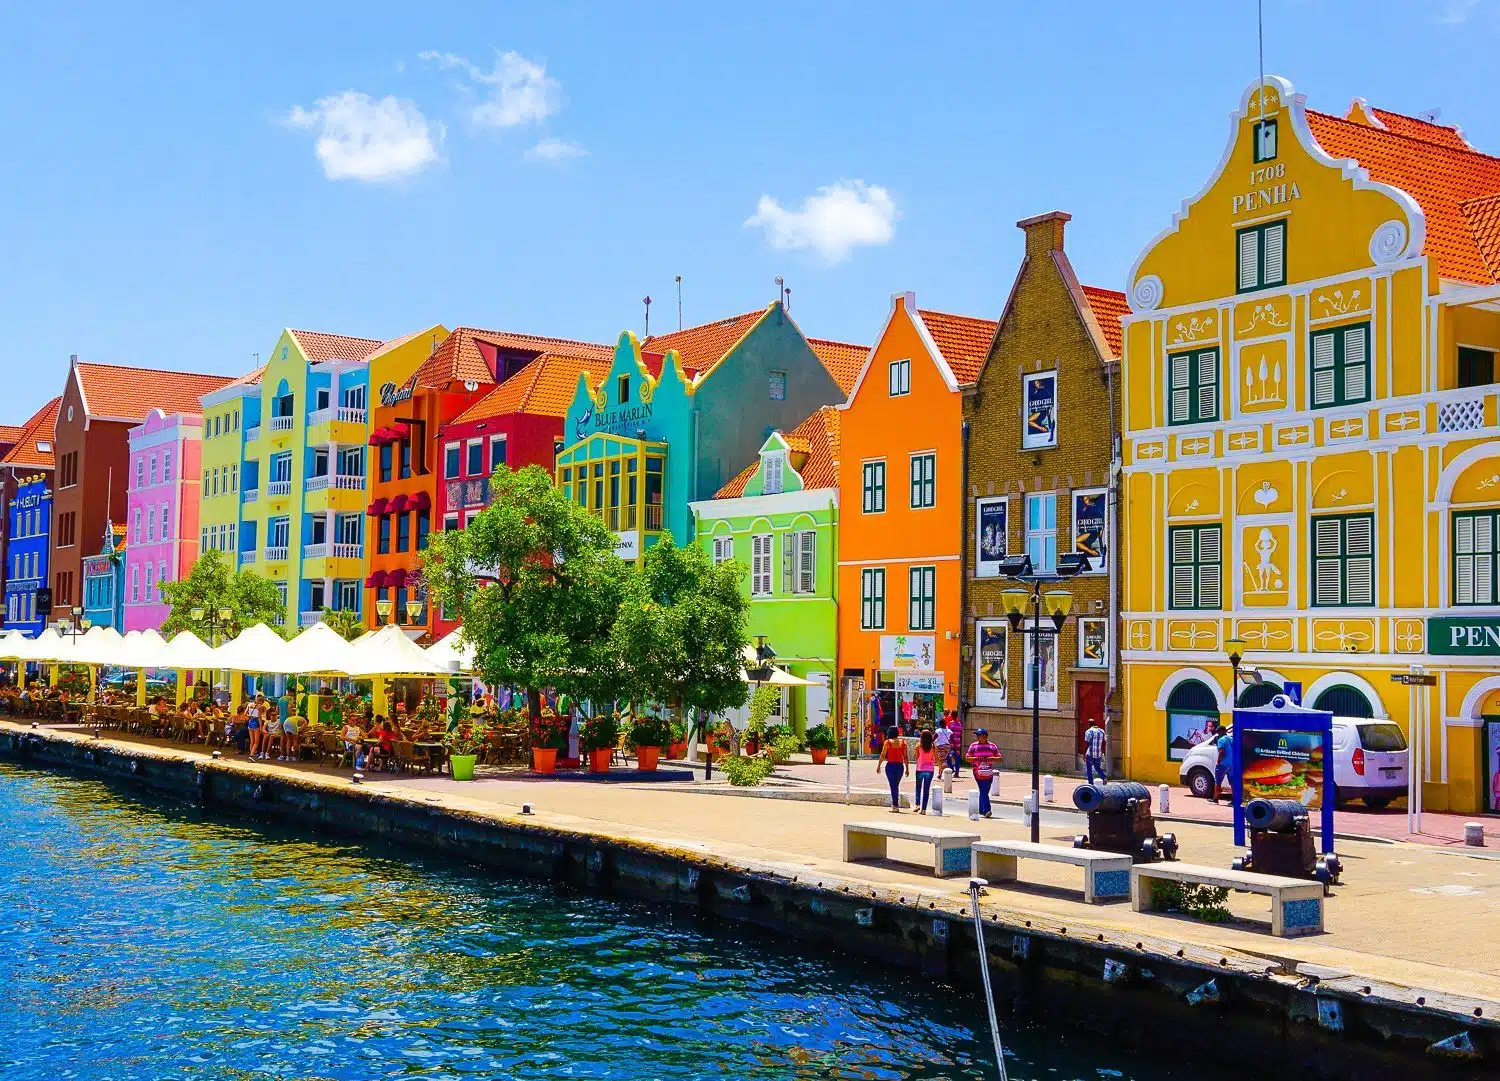 The architecture of Willemstad is THE BEST.